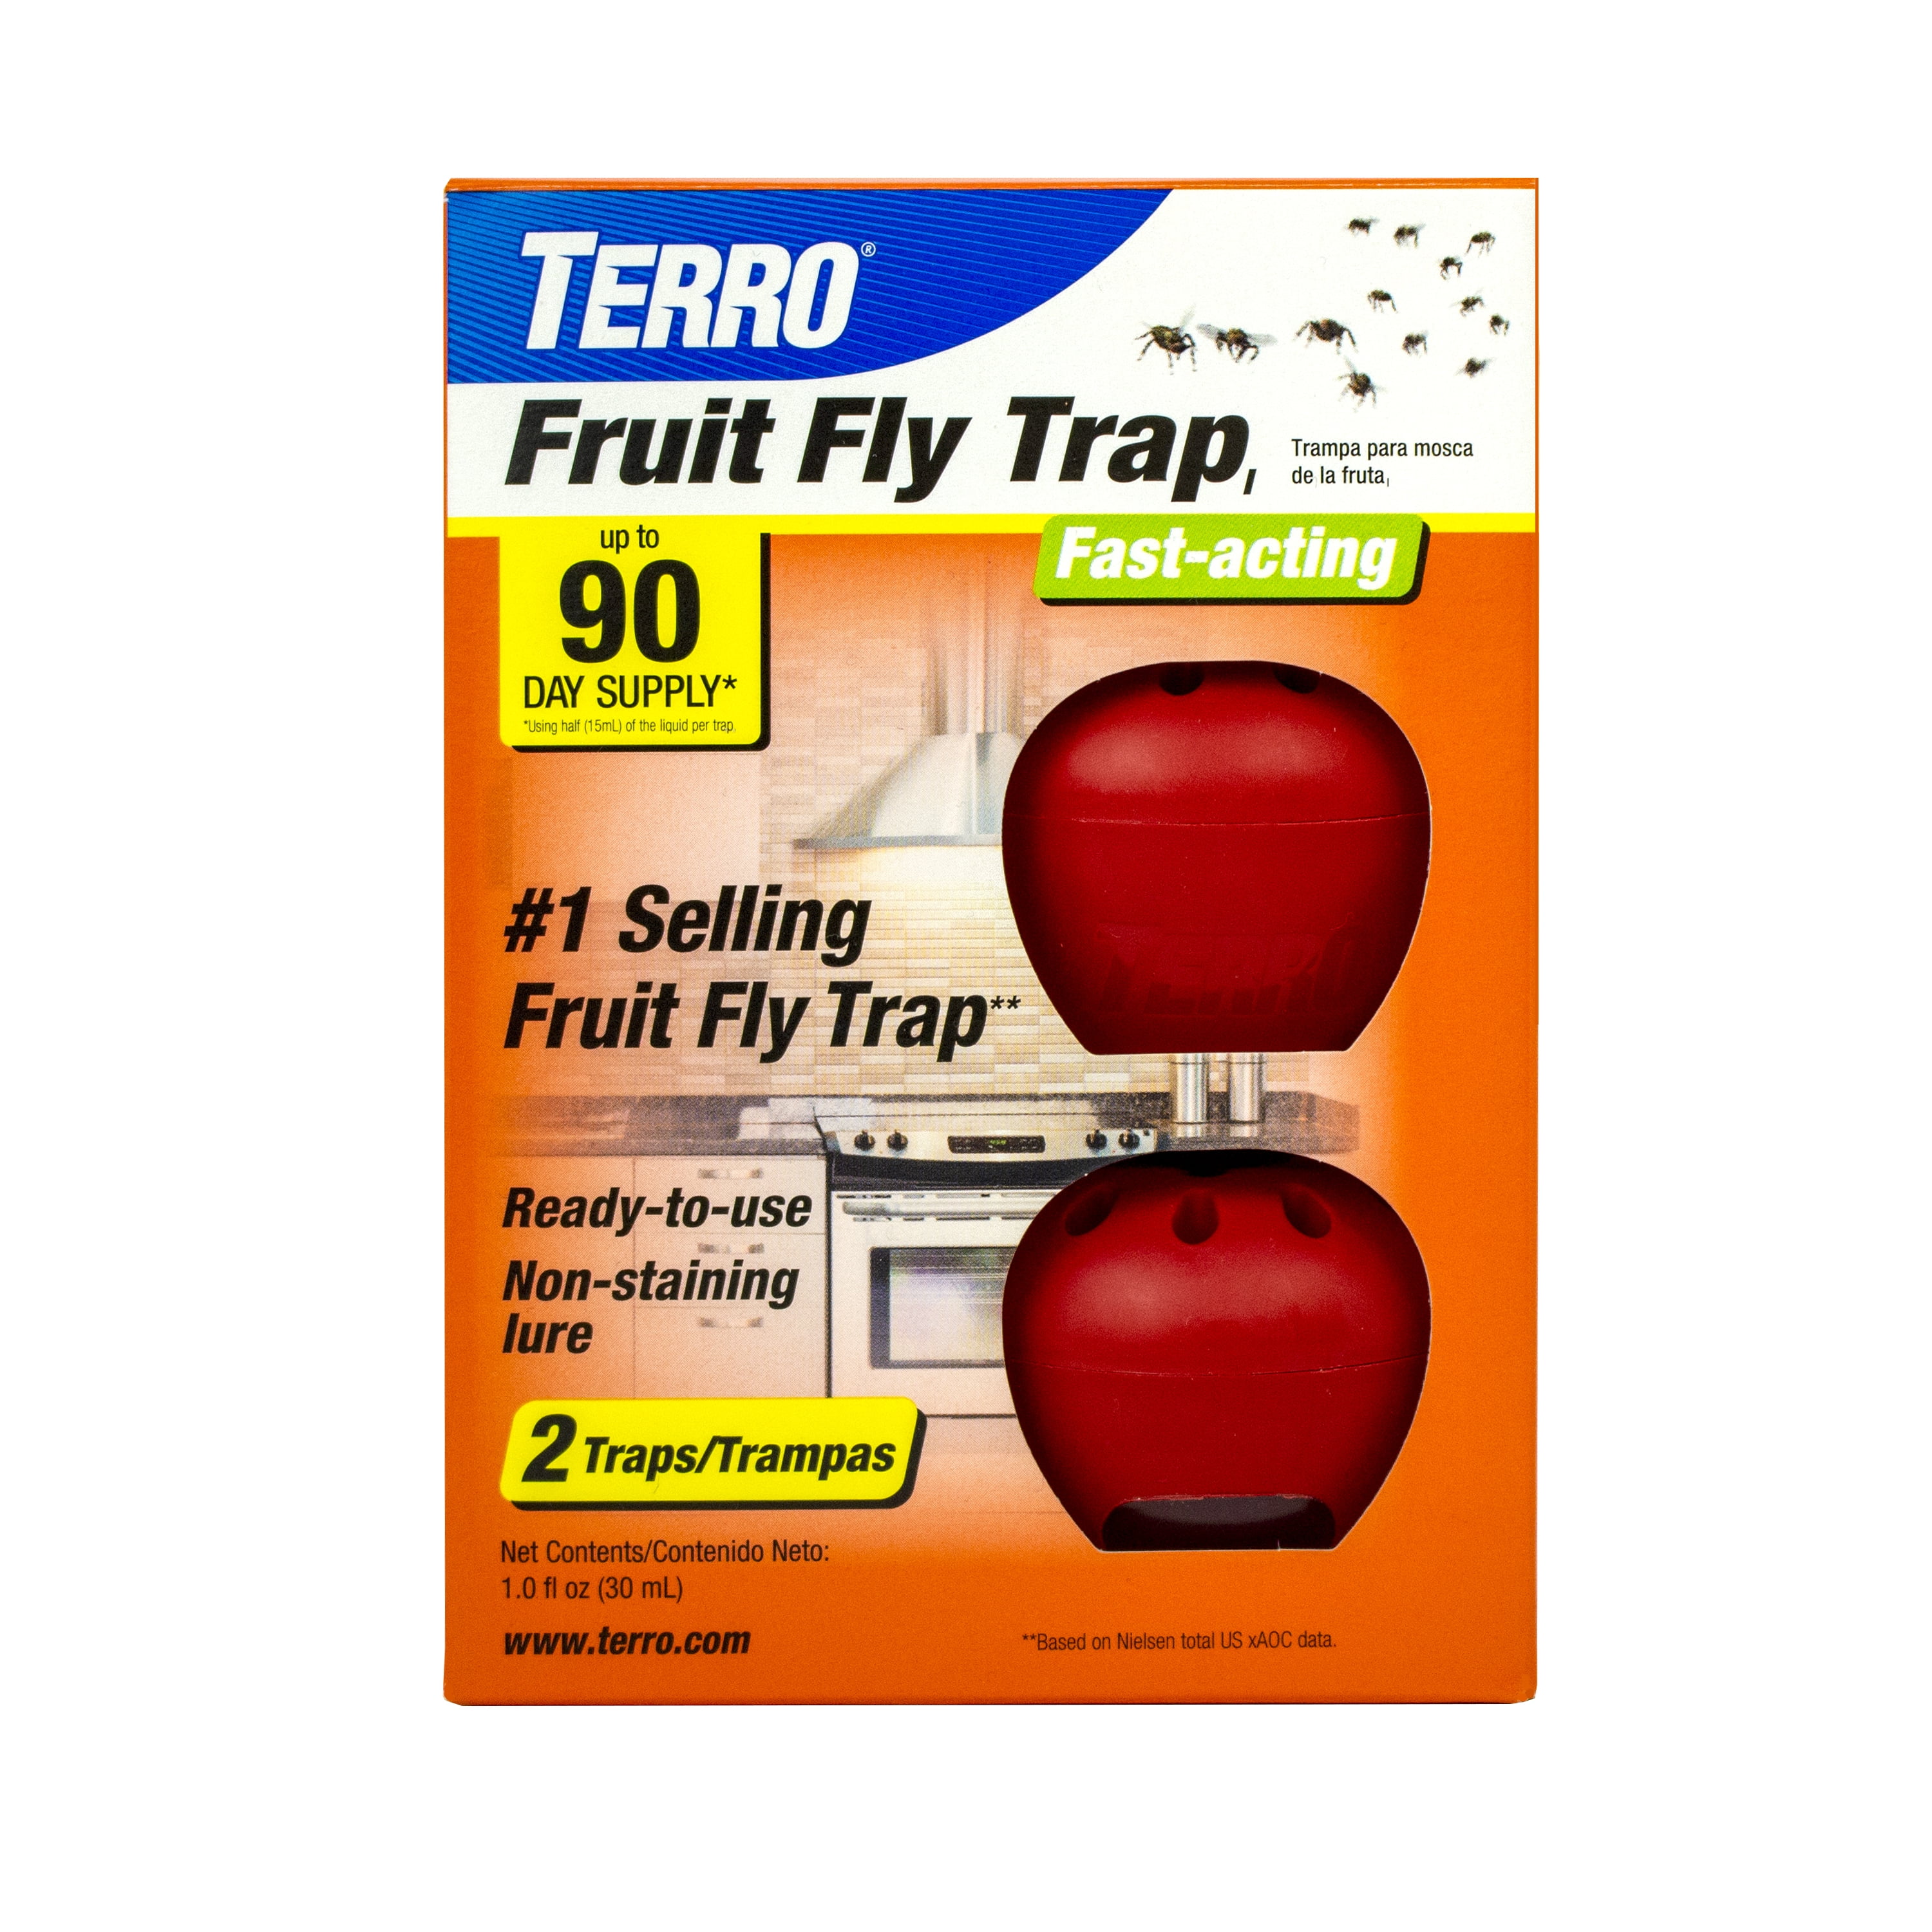  Protecker Fruit Fly Trap Refill Liquid Only,2023 Upgrade Traps  for Indoors,Efficient Gnat Killer Indoor,Fruit Bait Home,Kitchen,Fruit  T-E-R-R-O(4 Pack) : Patio, Lawn & Garden